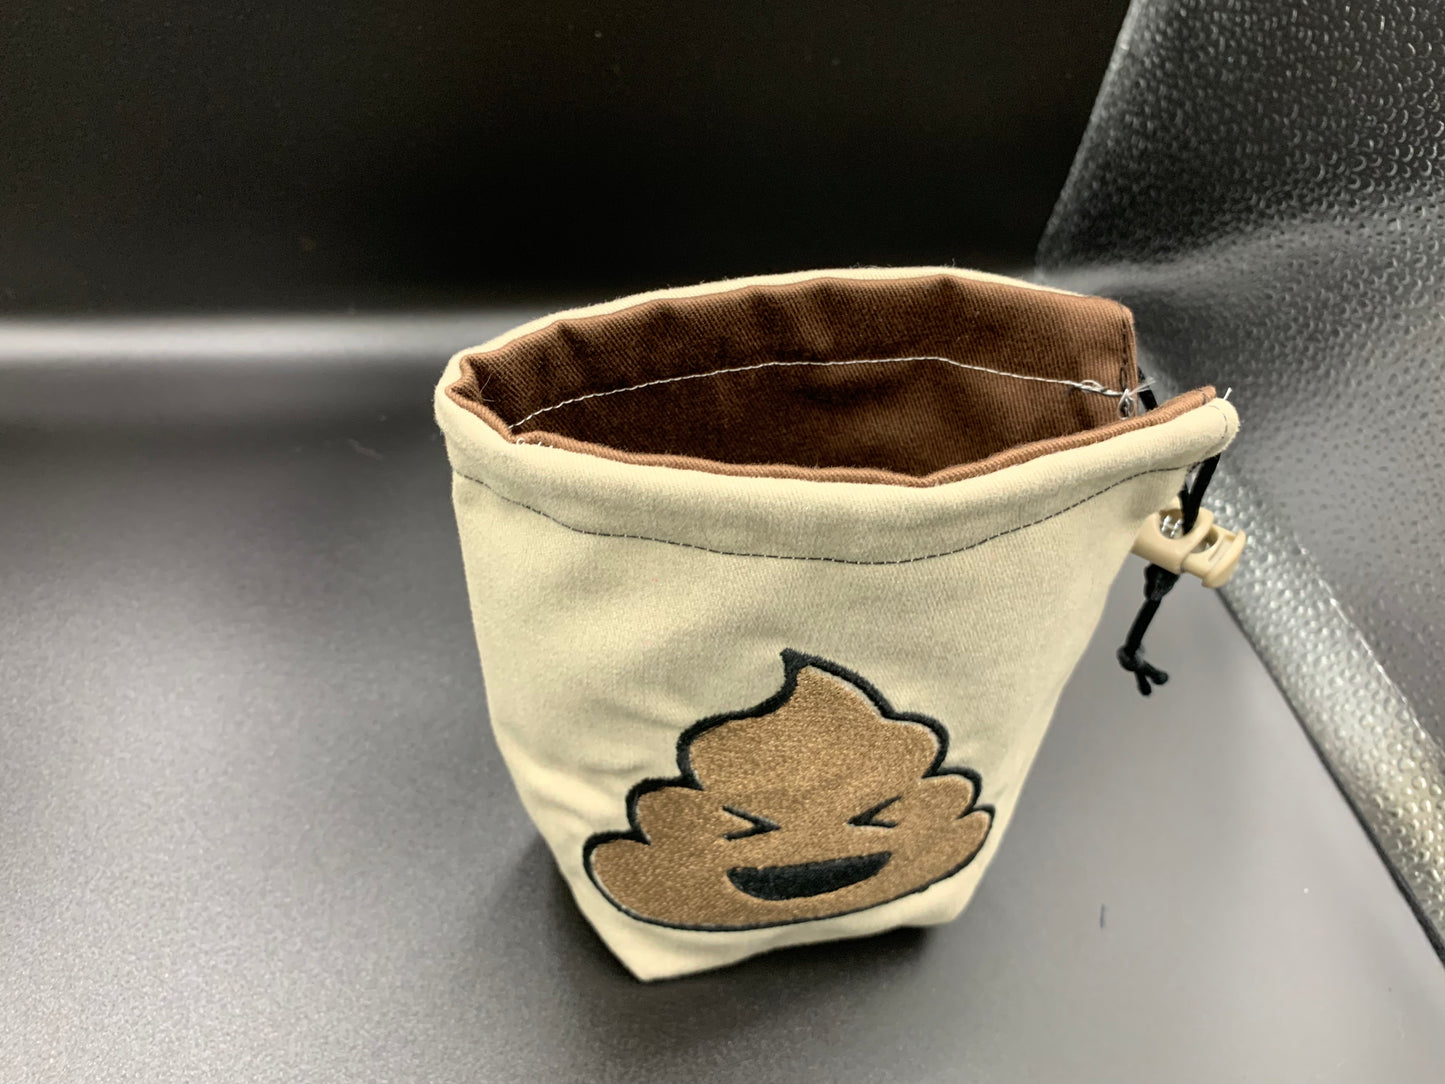 Laughing Poop Emoji Embroidered Bag - Small